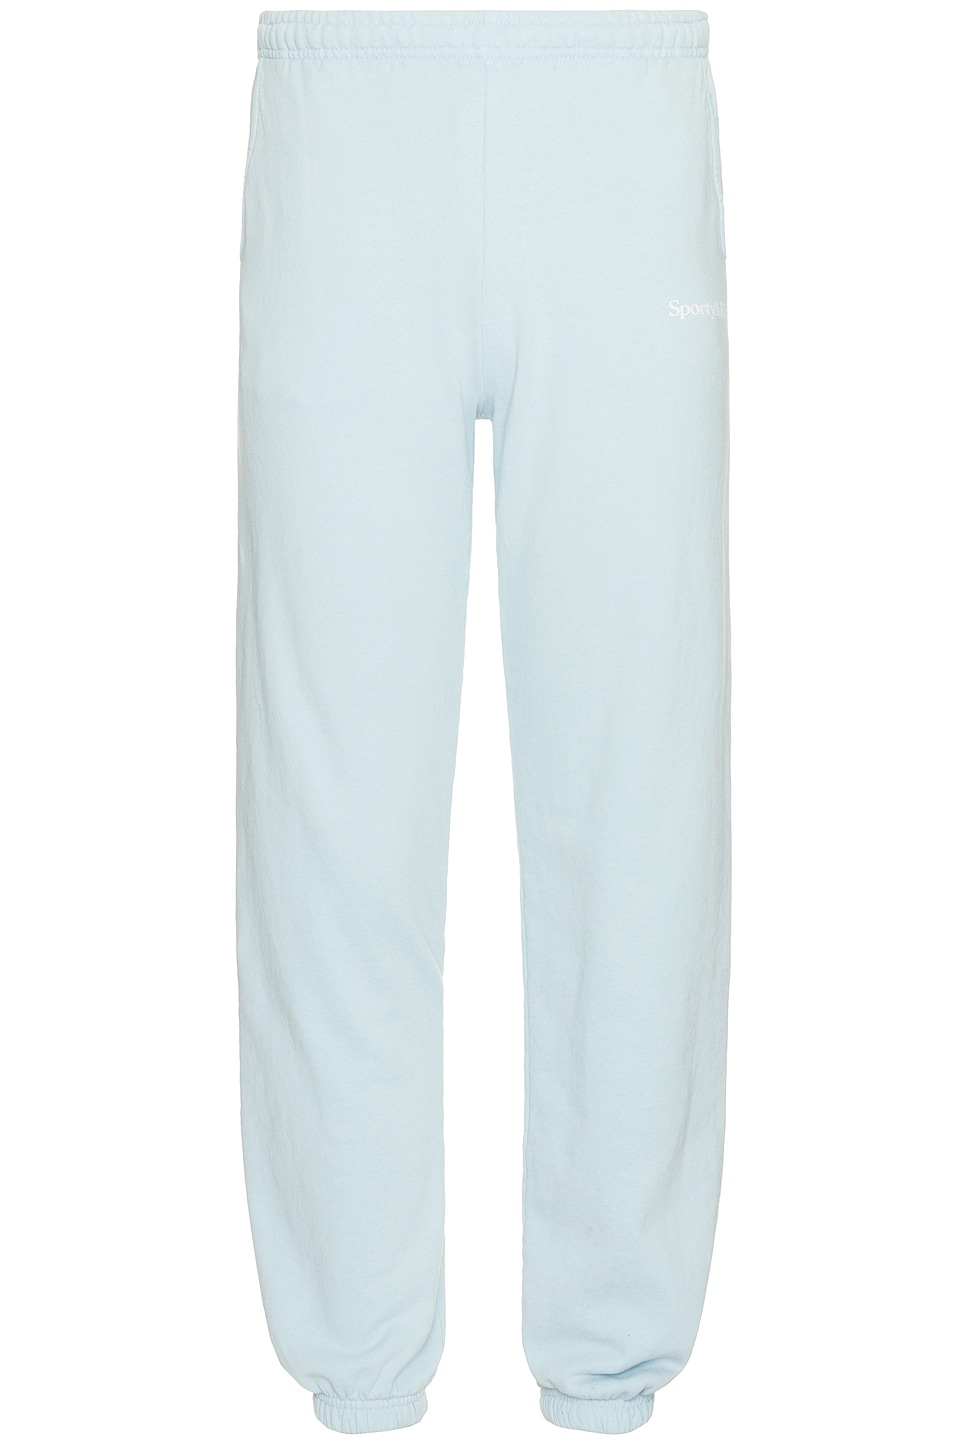 Image 1 of Sporty & Rich Serif Logo Sweatpants in Baby Blue & White